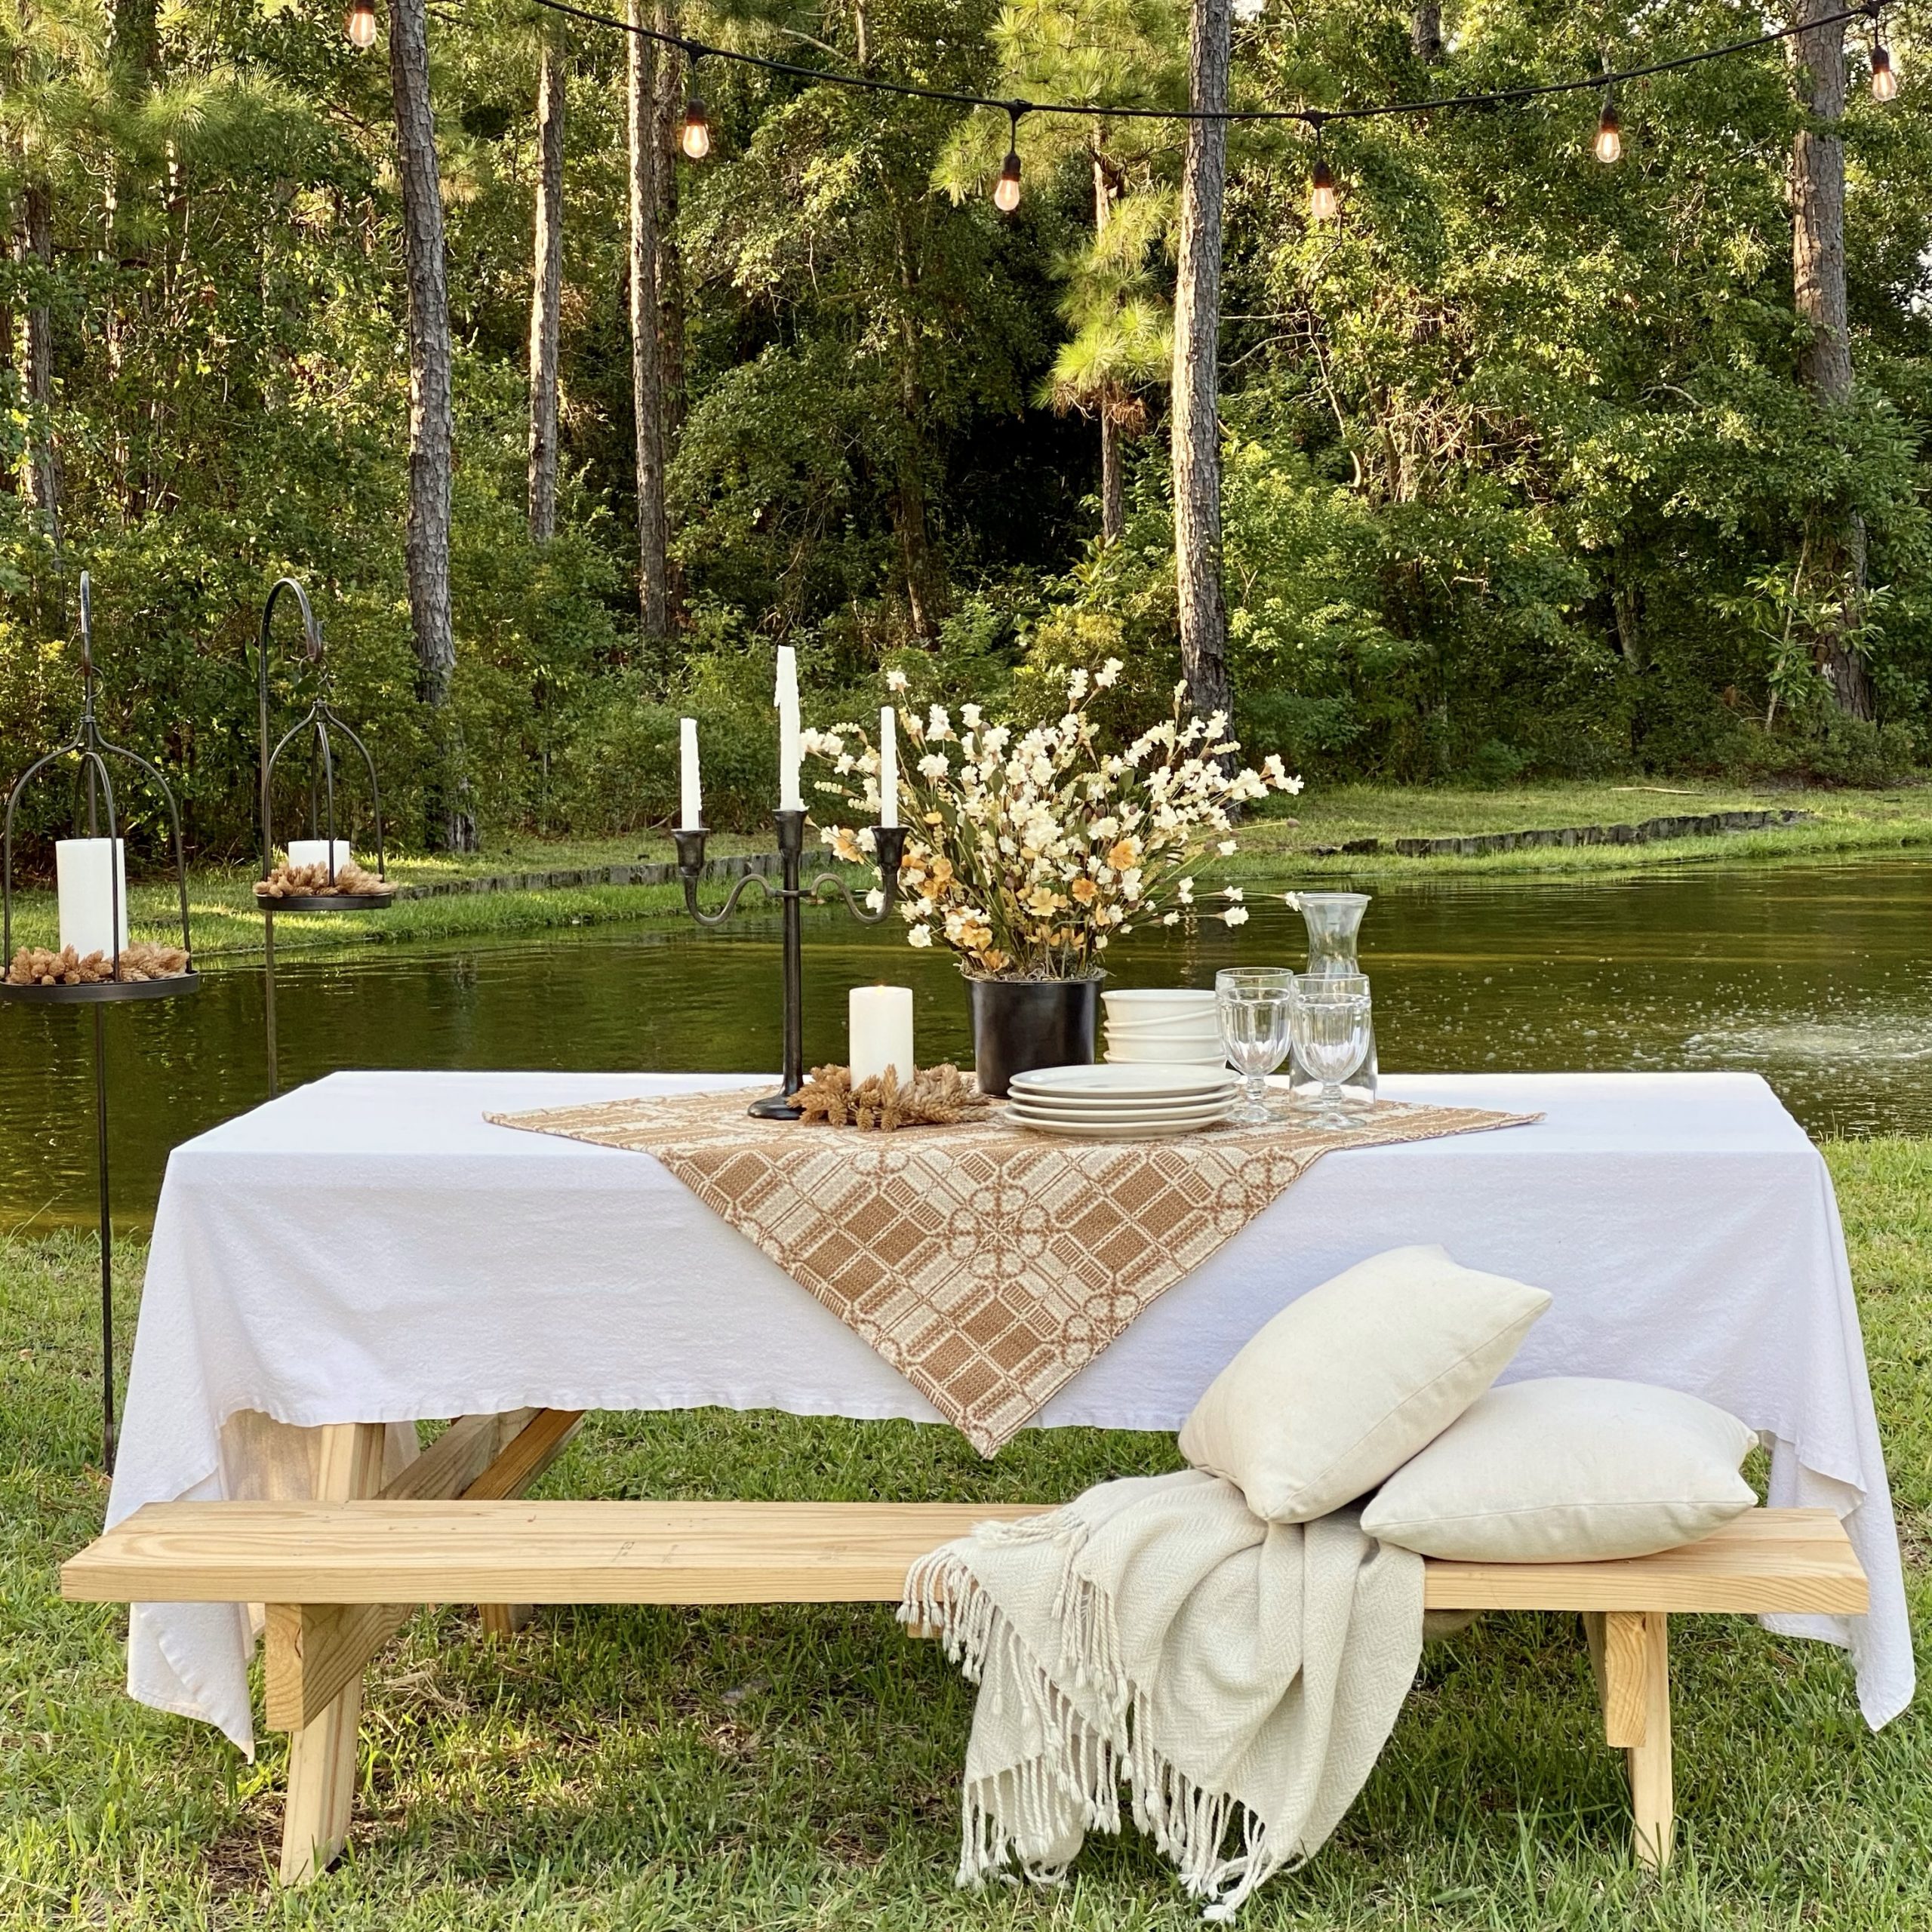 Picnic table by the pond decorated for early Fall with table cloths, candles, fall florals, plates, bowls and glasses.